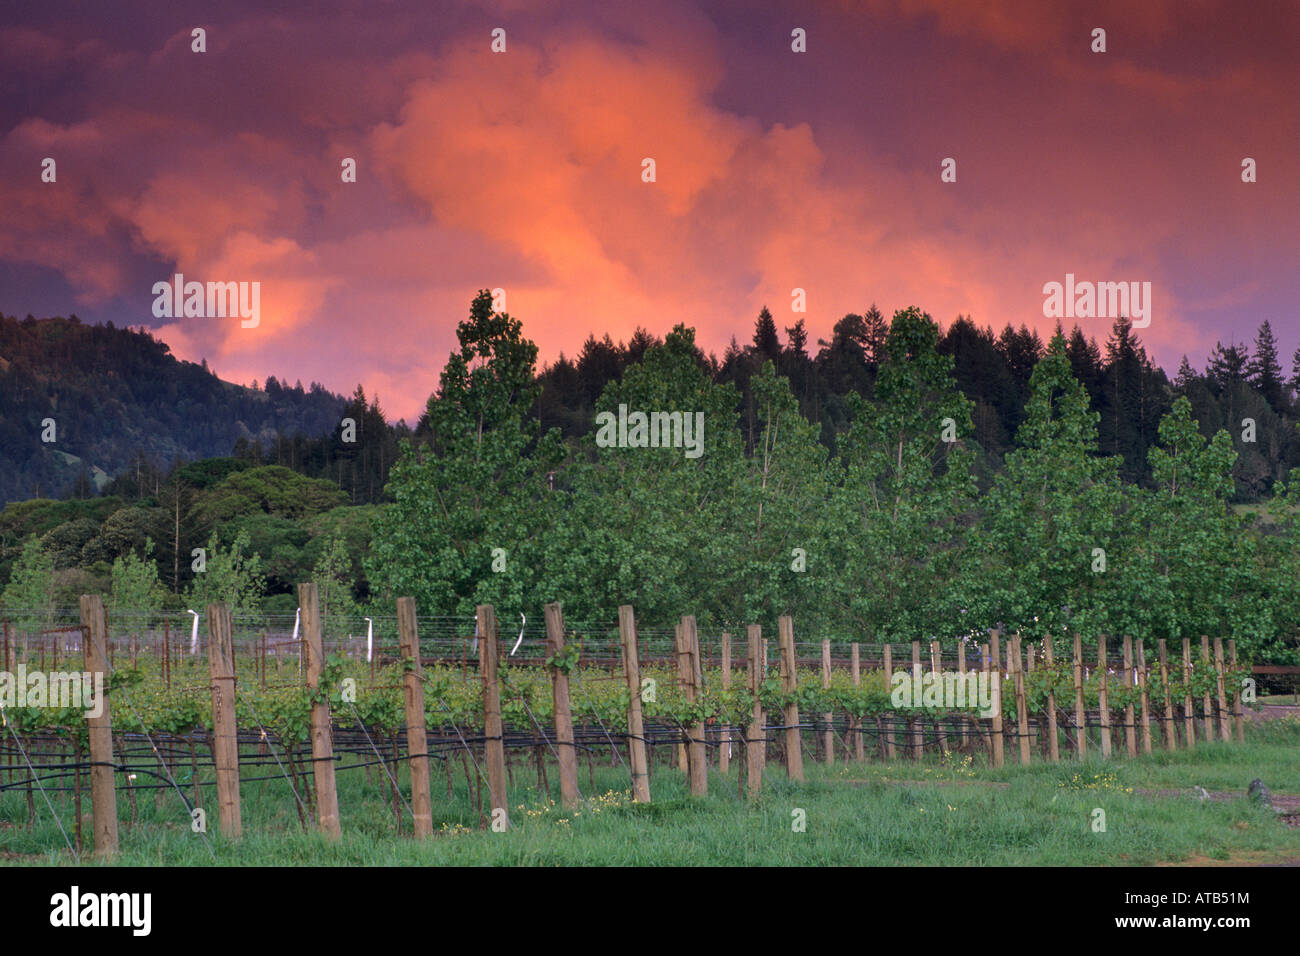 Sunset on spring storm clouds over vineyard and trees in the Anderson Valley Mendocino County California Stock Photo